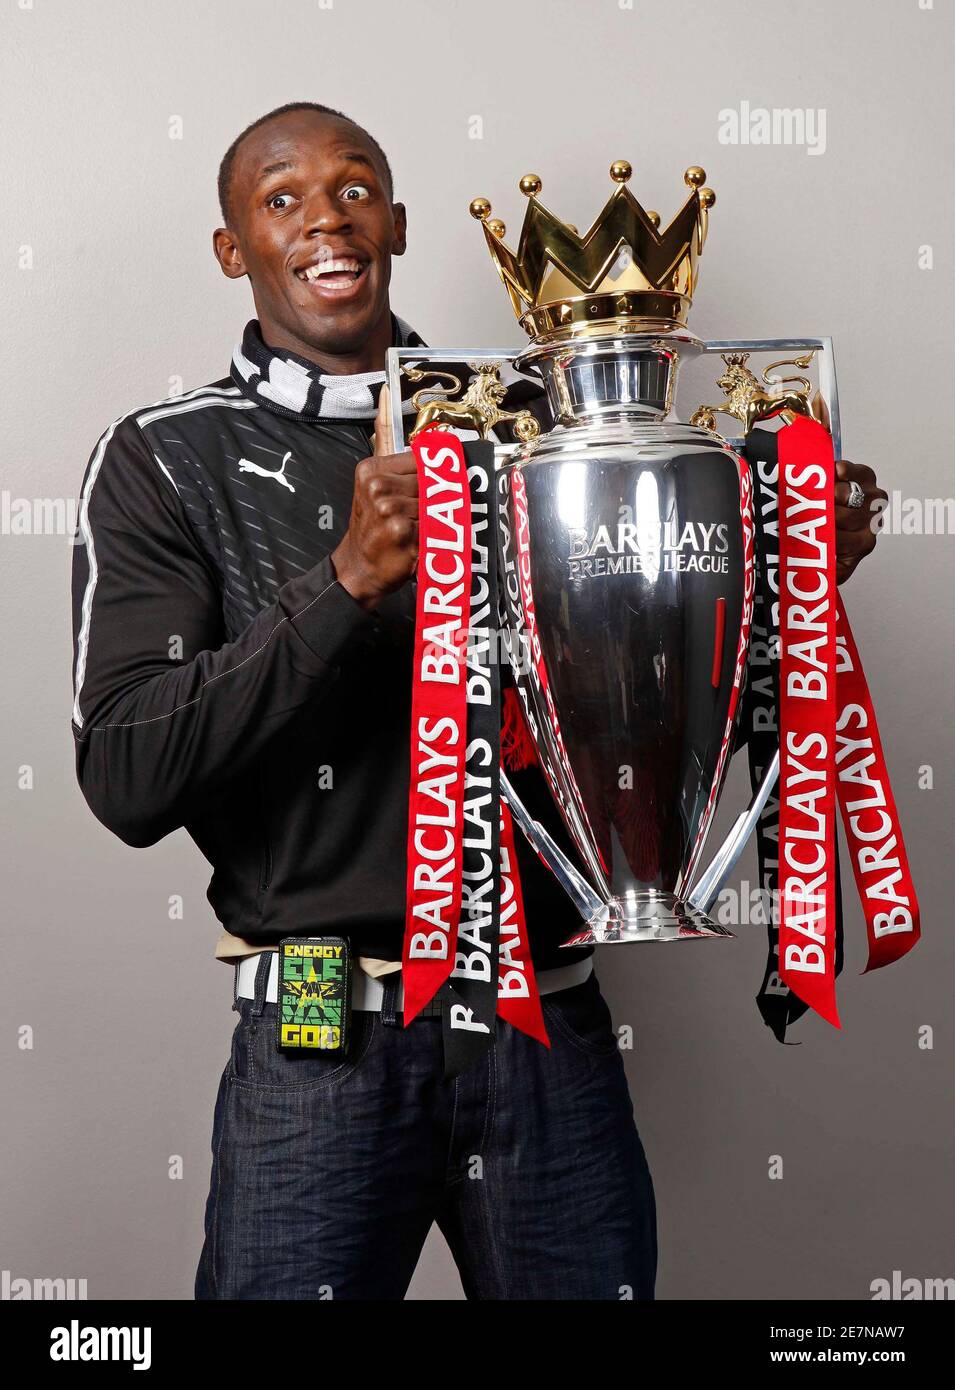 Jamaican sprinter Usain Bolt, who is a Manchester United fan, poses with  the English Premier League trophy in Manchester May 15, 2009. Triple  Olympic champion Bolt takes to the streets of Manchester